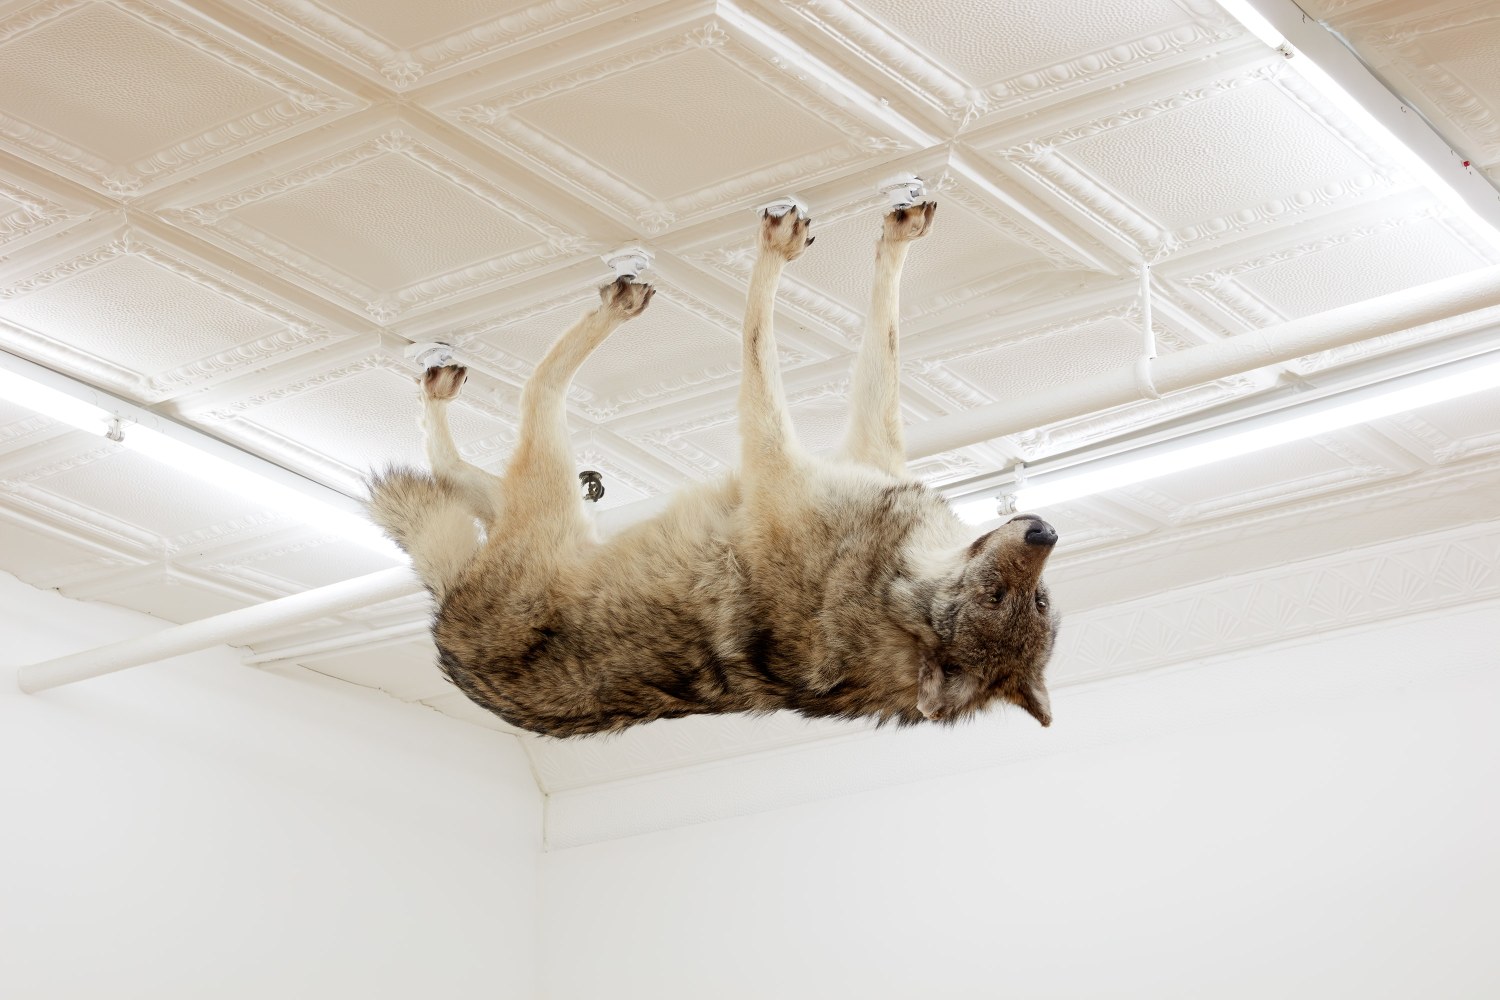 &amp;nbsp;

Nicholas Galanin

Infinite Weight, 2022

taxidermied wolf with monitor and video loop

installation; dimensions variable
wolf: 34 1/2 x 59 x 13 inches (87.6 x 149.9 x 33 cm)
video: 17 seconds; loop
monitor: 30 1/2 x 53 1/4 inches (77.5 x 135.1 cm)

(NGA22-09)